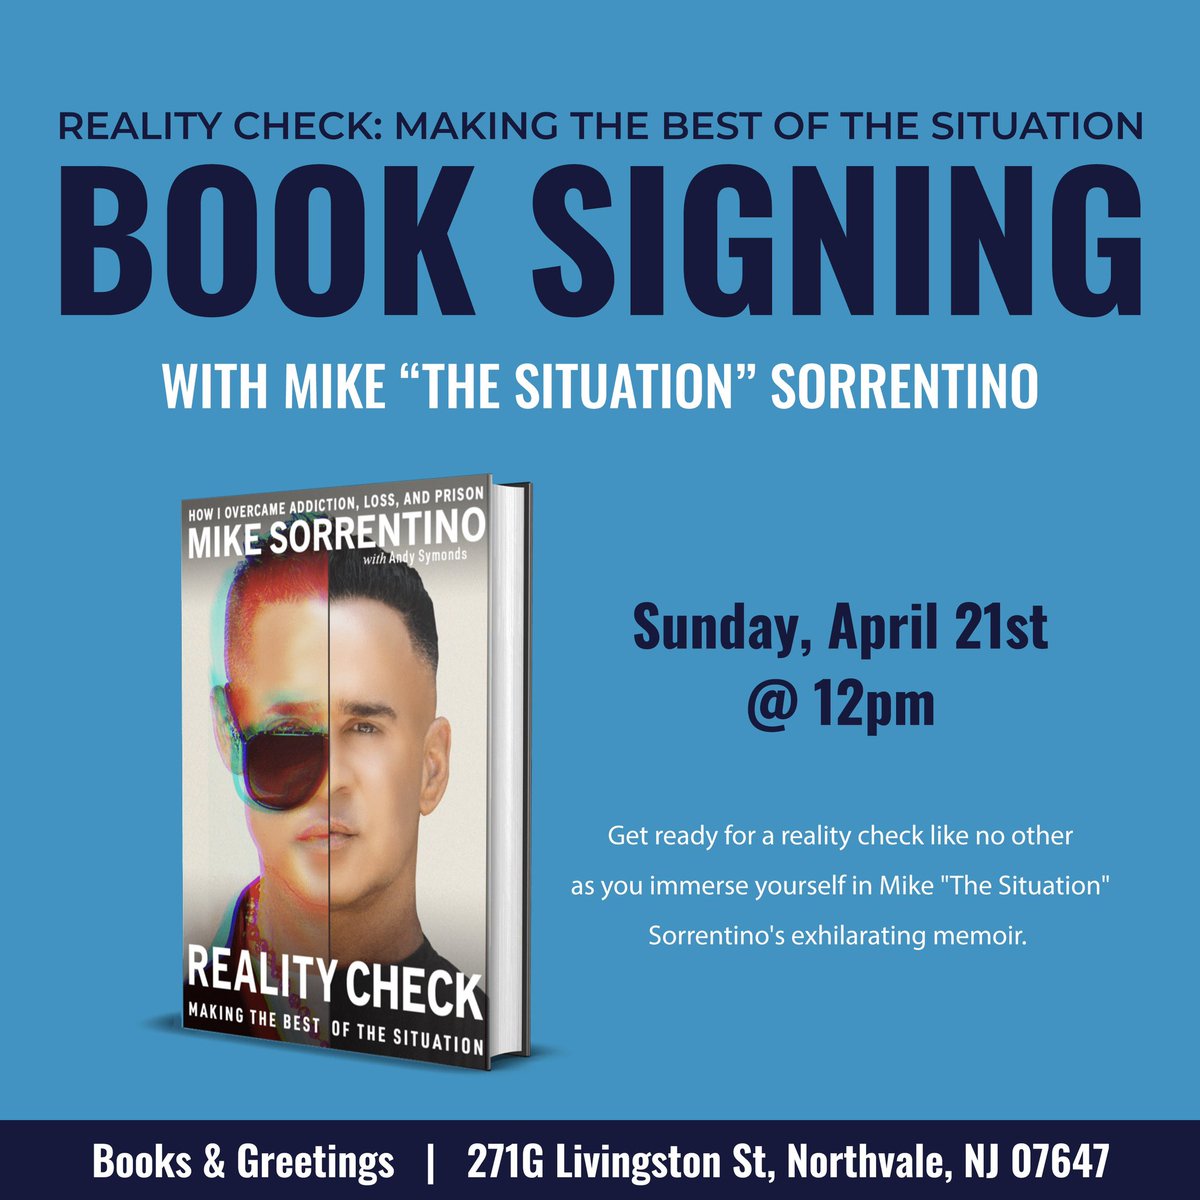 Northvale, NJ 🔥 Are you ready?📚

Join me April 21st @12pm at @booksngreetings for a Reality Check:Making the Best of the Situation Book Signing 😎

Tickets included with book purchase🎟️: 

eventbrite.com/e/meet-the-jer…

See you there 🔥😎